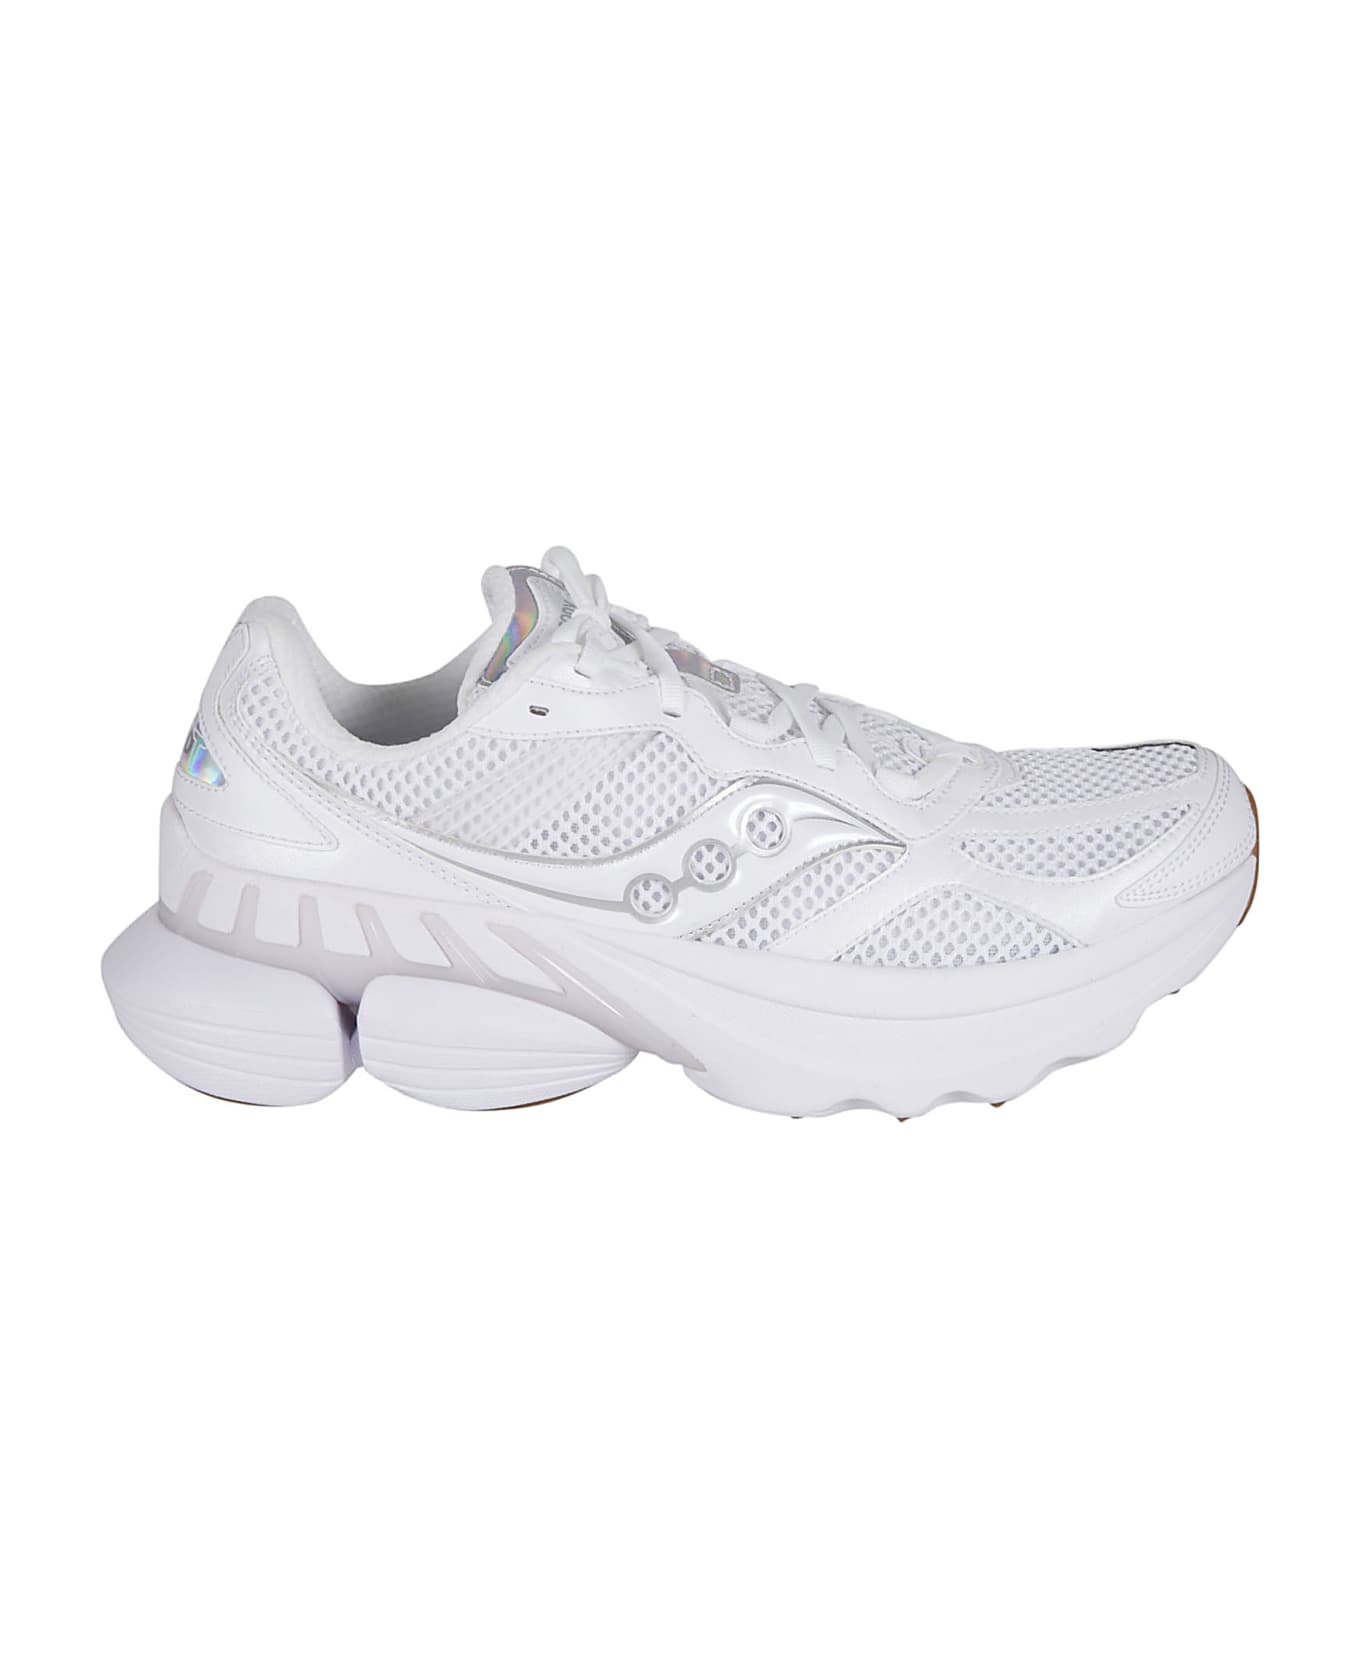 Saucony Grid Nxt Sneakers - White